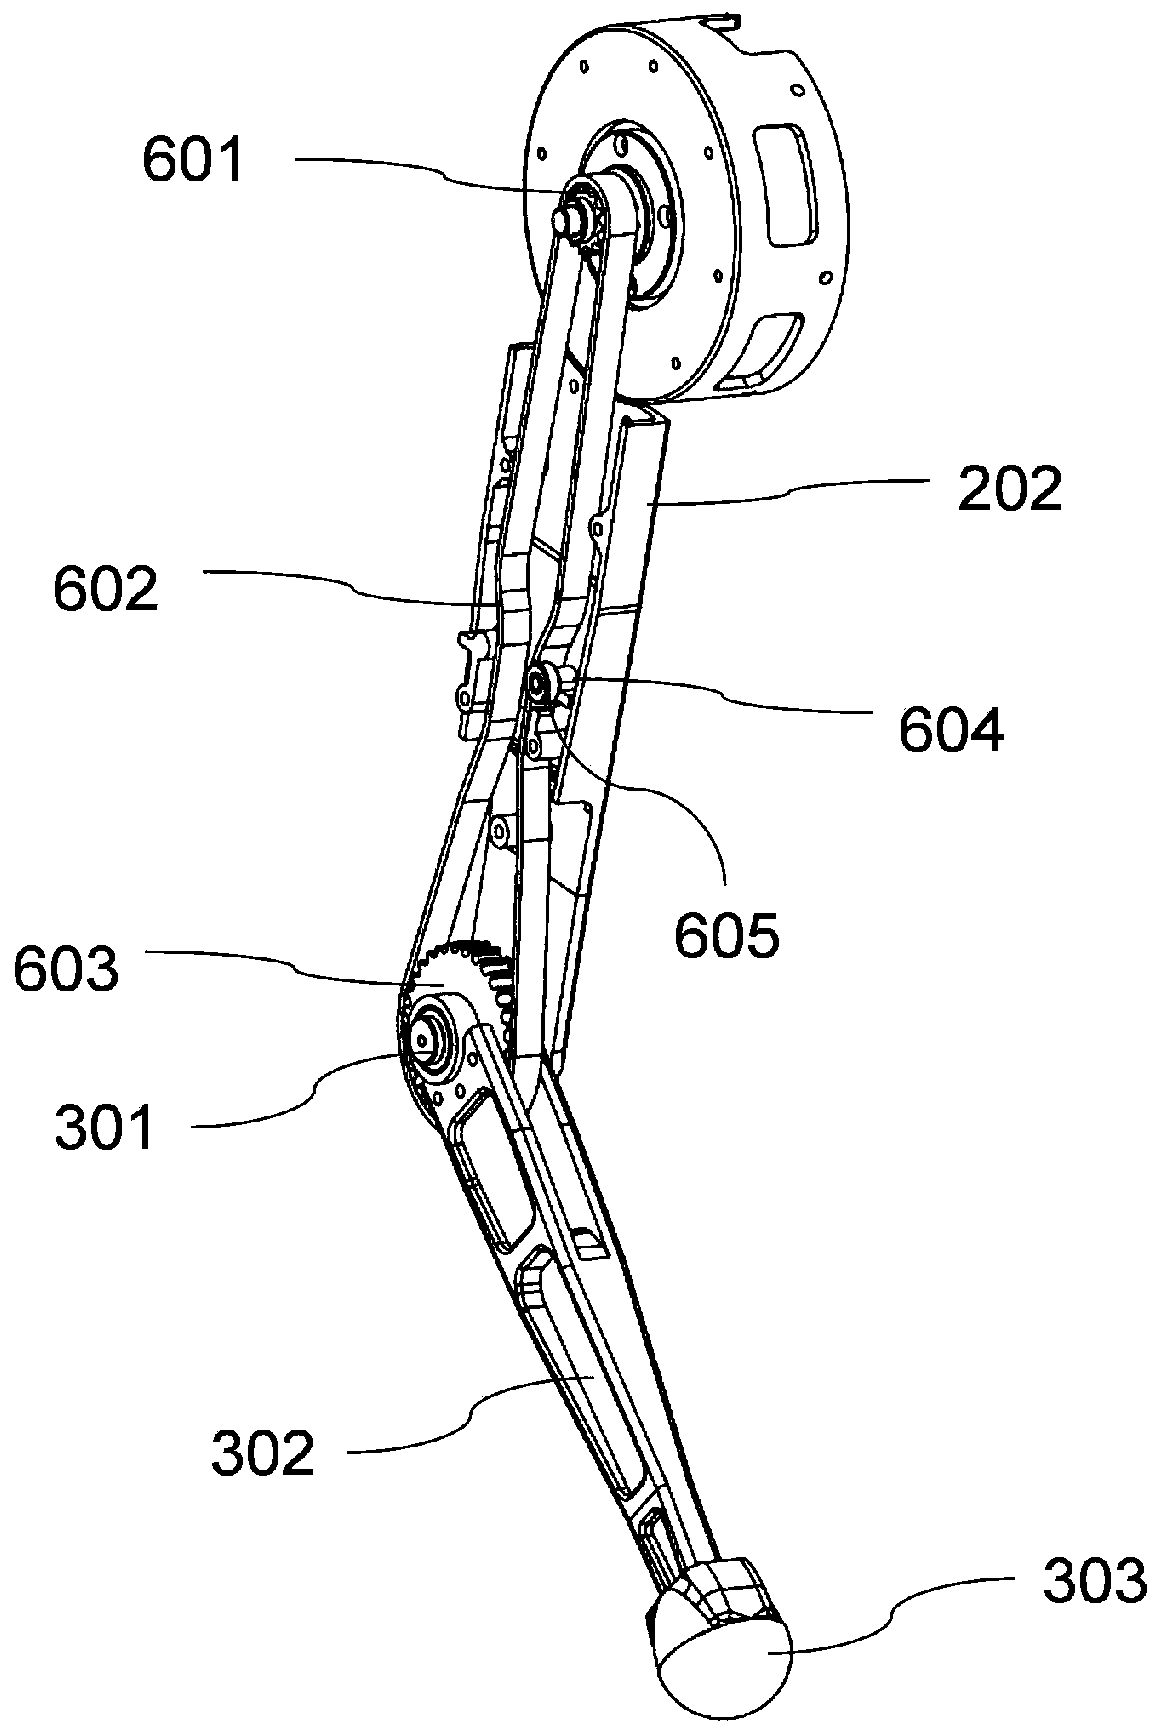 Modular foot-type single leg and cycloid planning method based on low reduction ratio motor technology